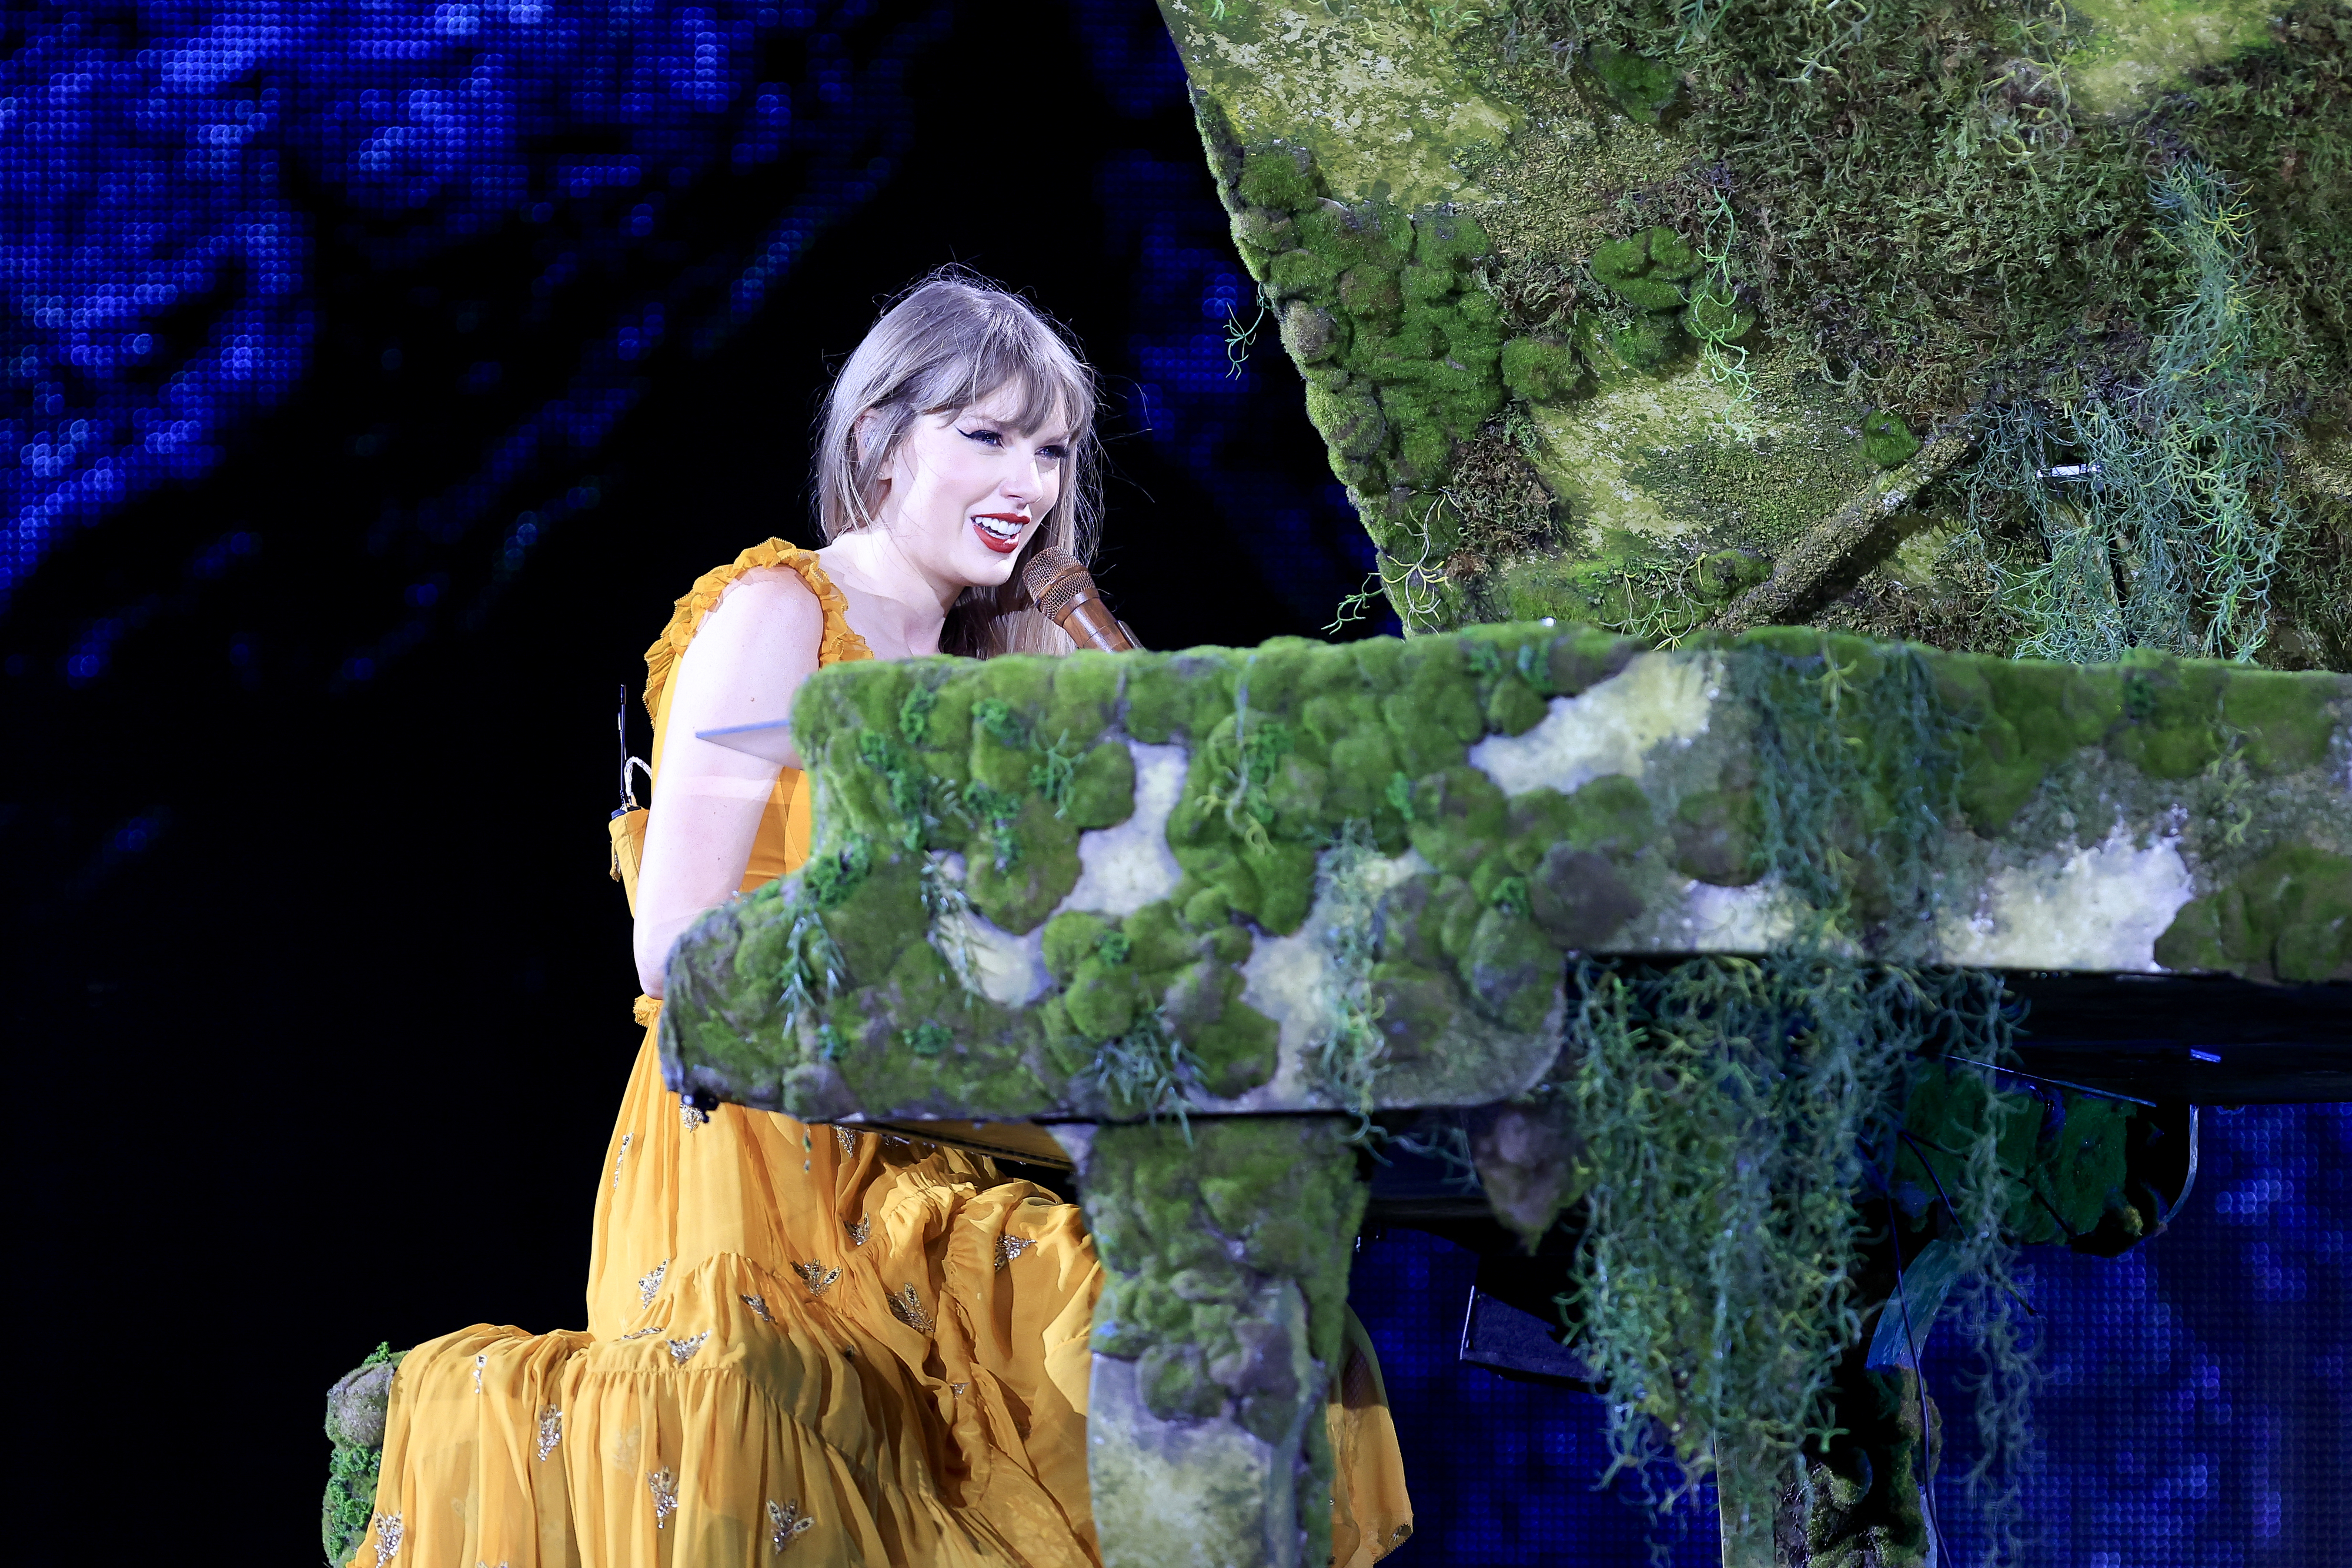 Taylor Swift onstage playing the piano